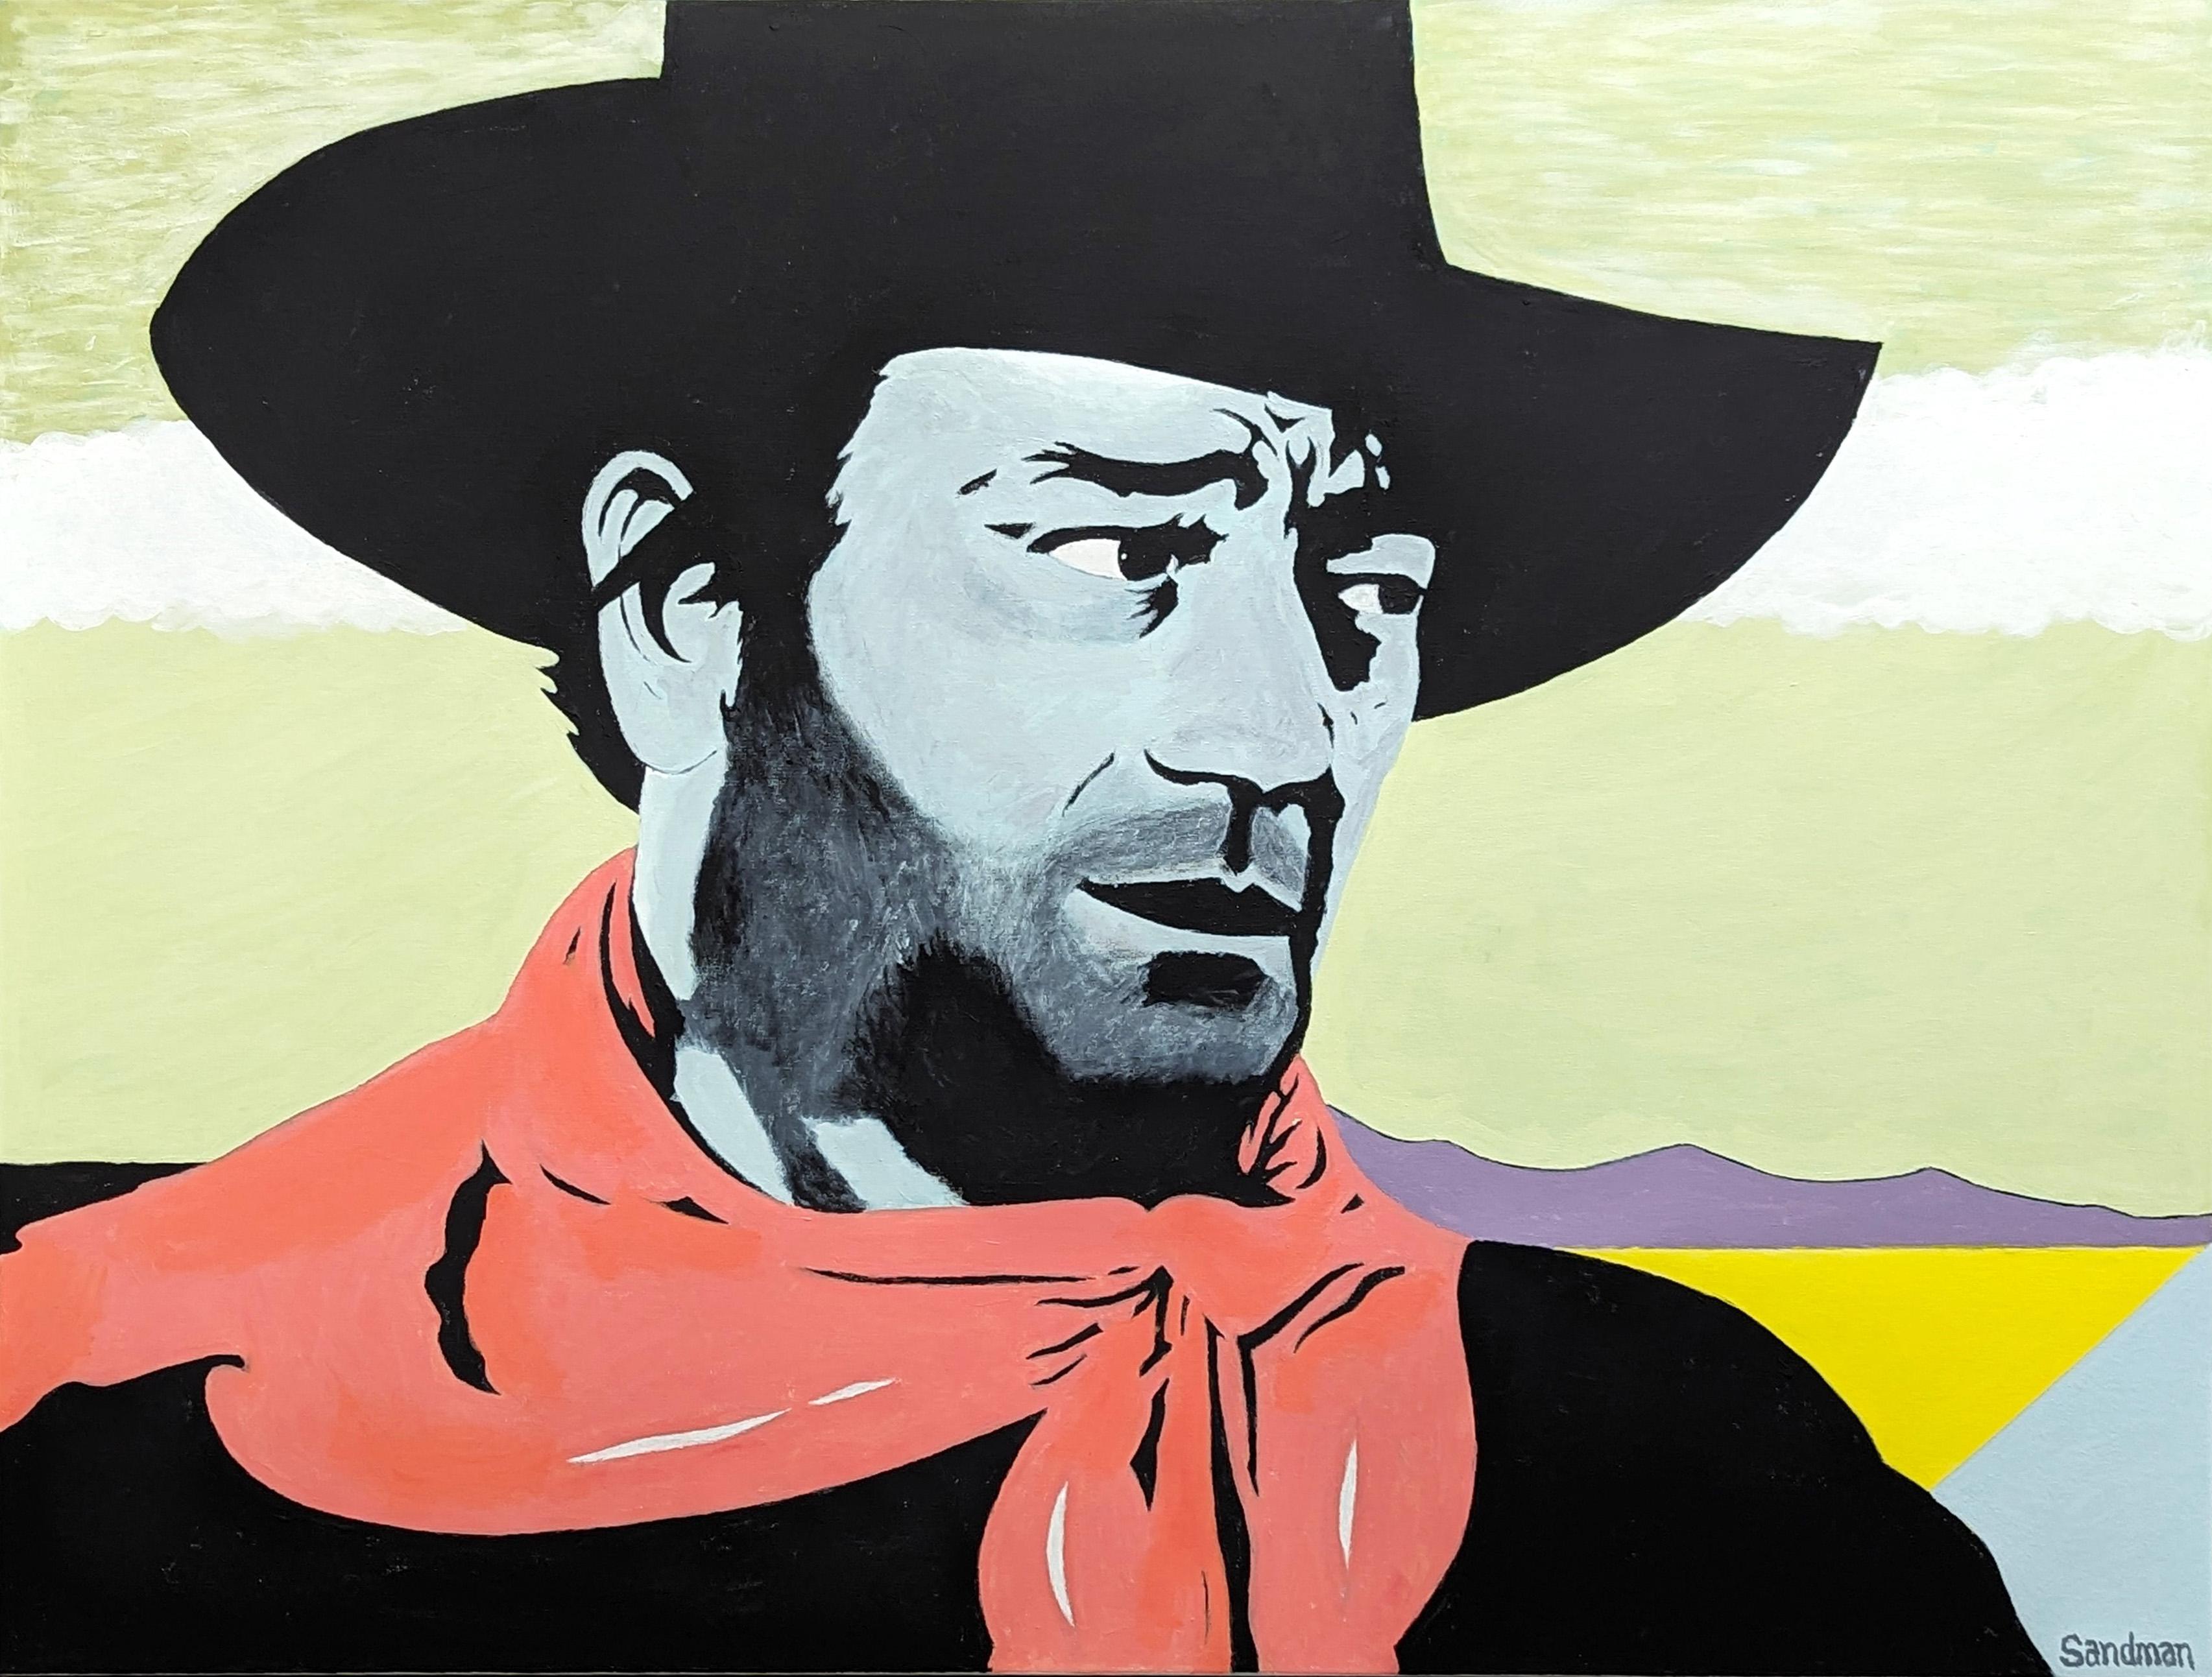 Colorful contemporary portrait of famous movie star John Wayne by Texas-based artist Robert Sandman. The work features a realistic portrayal of the actor dress in his iconic cowboy attire depicted in bold, pastel tones. Signed by the artist in the